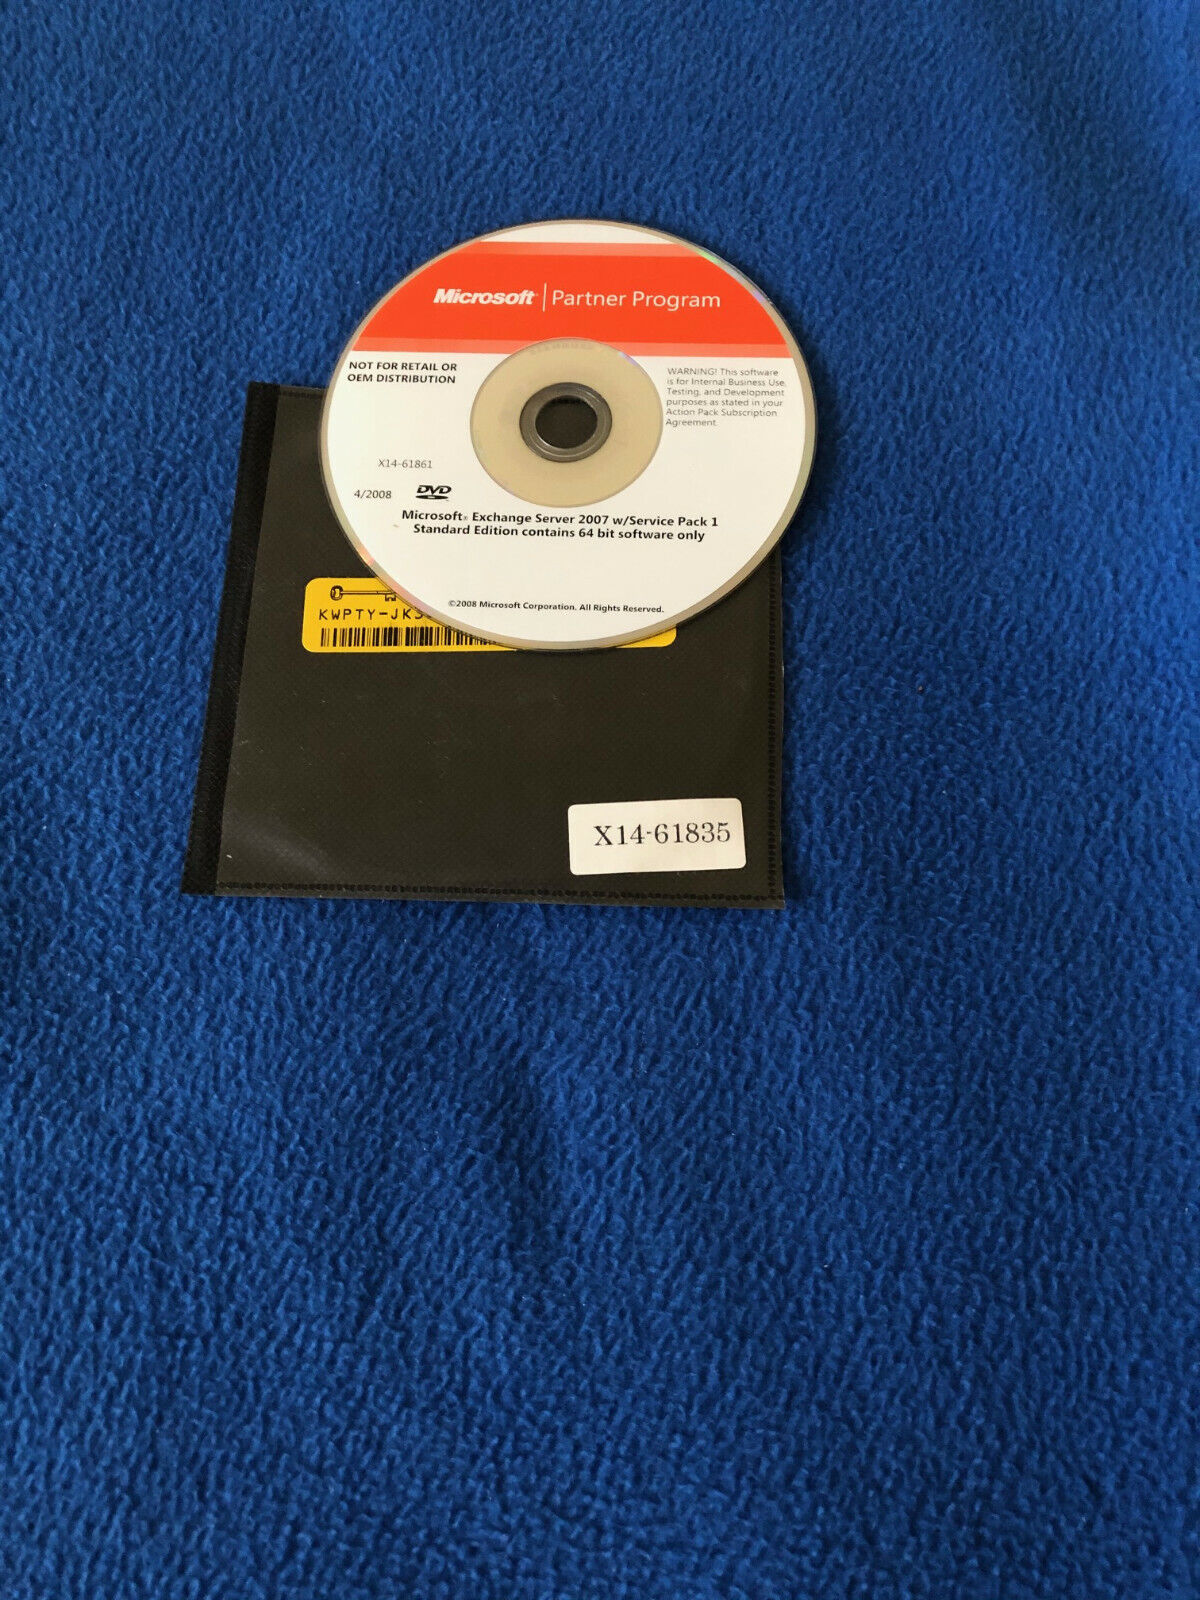 Microsoft Exchange Server 2007 Standard Edition 64bit with Product key